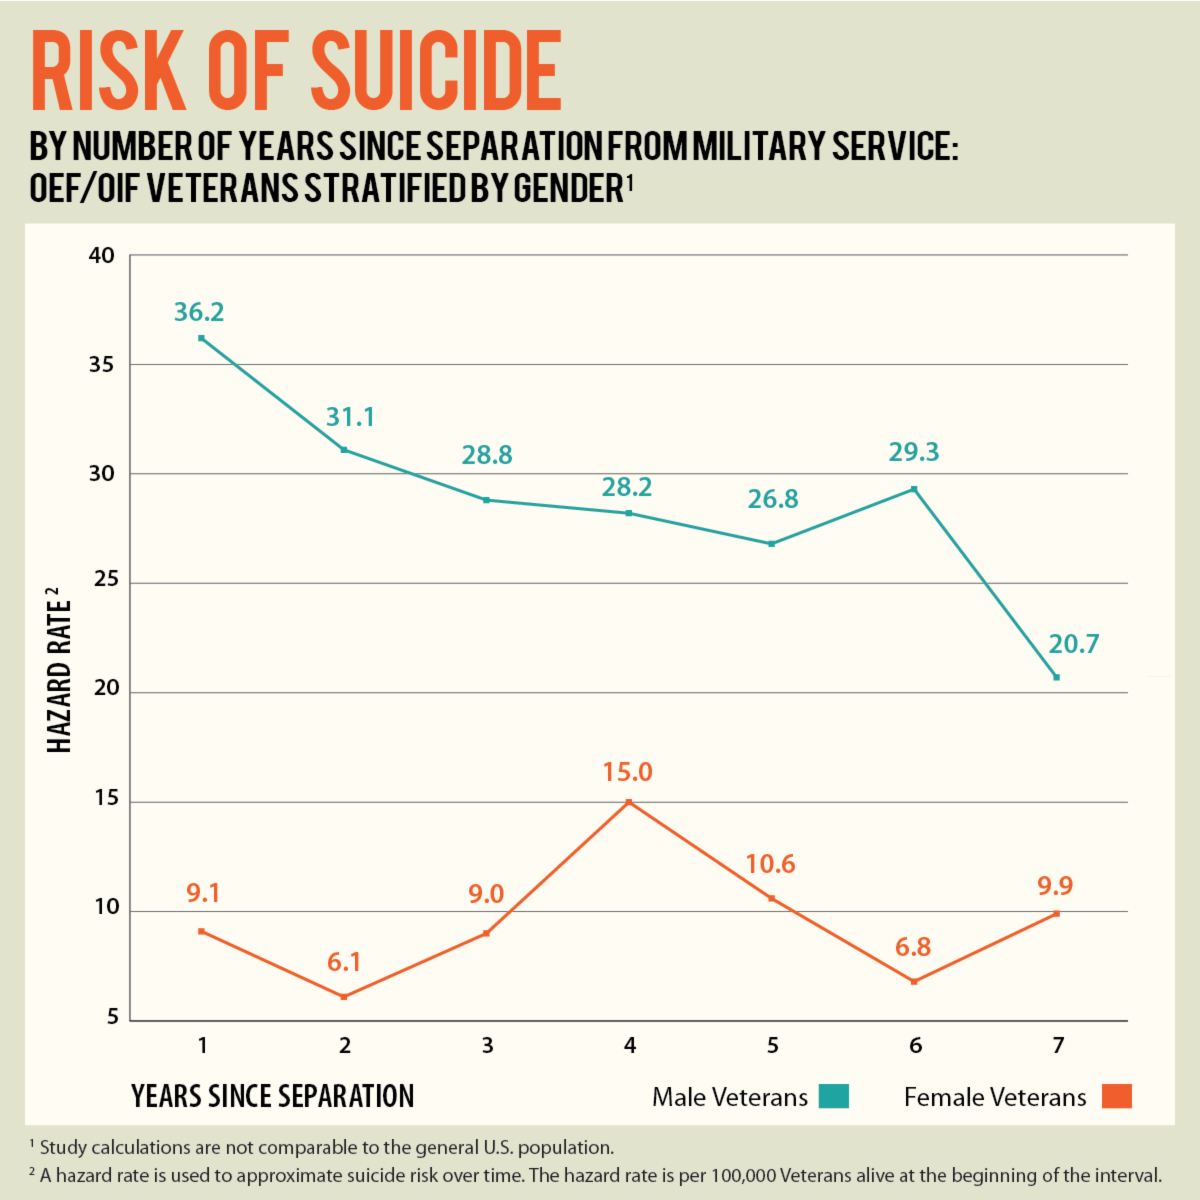 Line graph showing risk of suicide in male and female OEF/OIF Veterans by number of years since separation from military